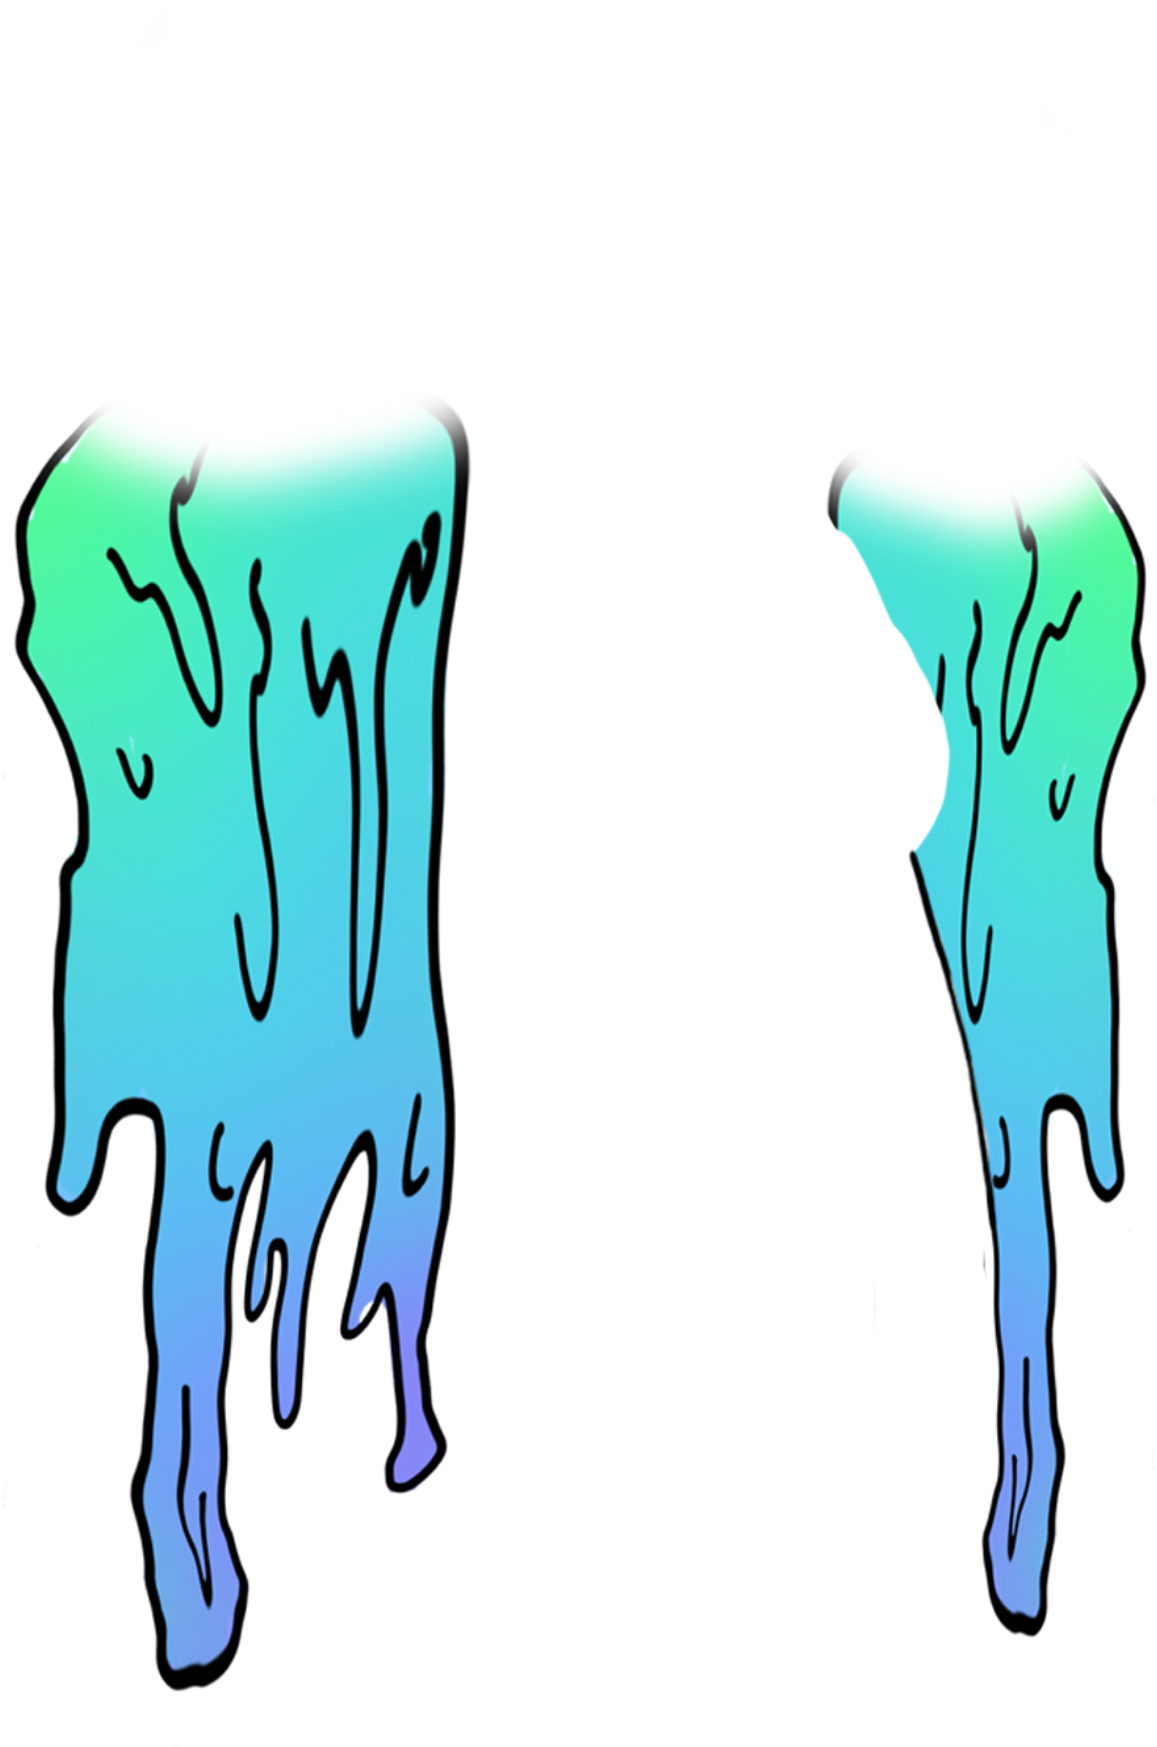 Slime Sticker - Dripping Slime (2289x2289)